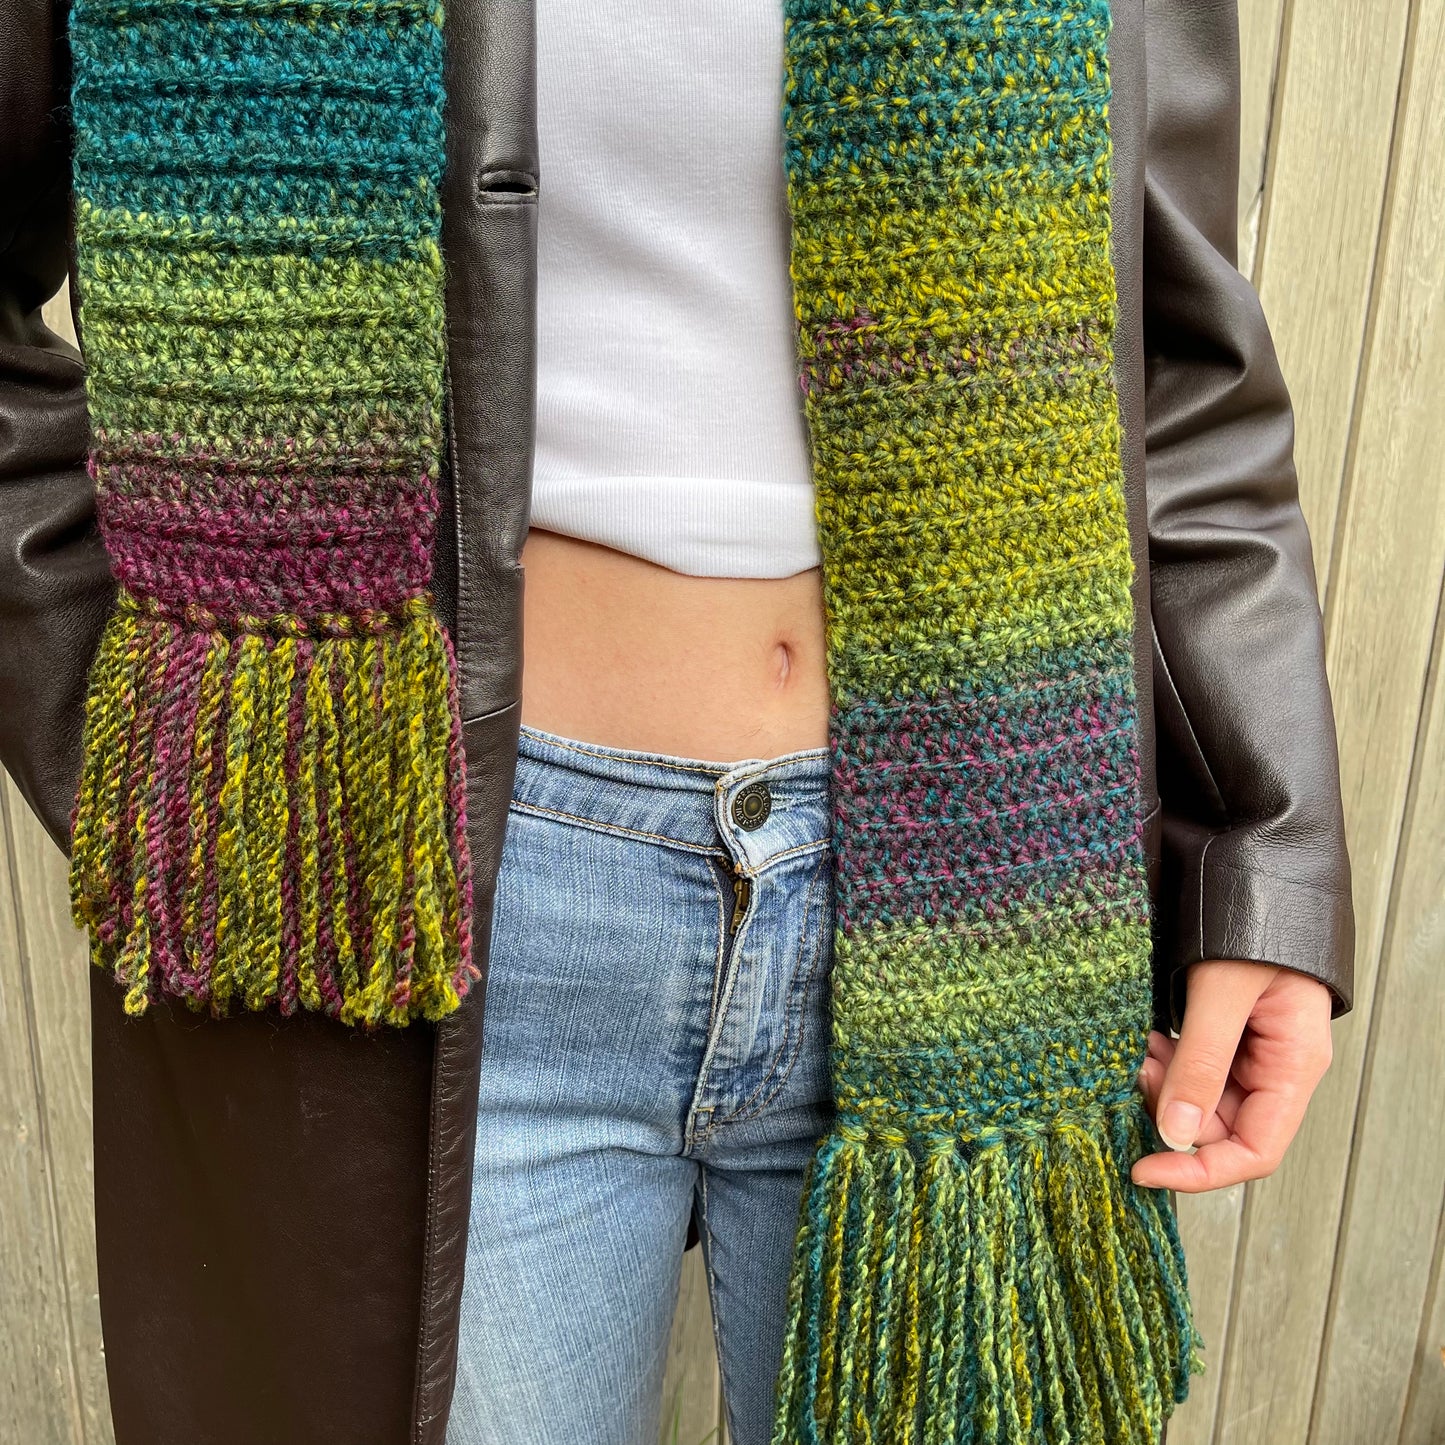 Handmade ombré green and purple crochet scarf with tassels